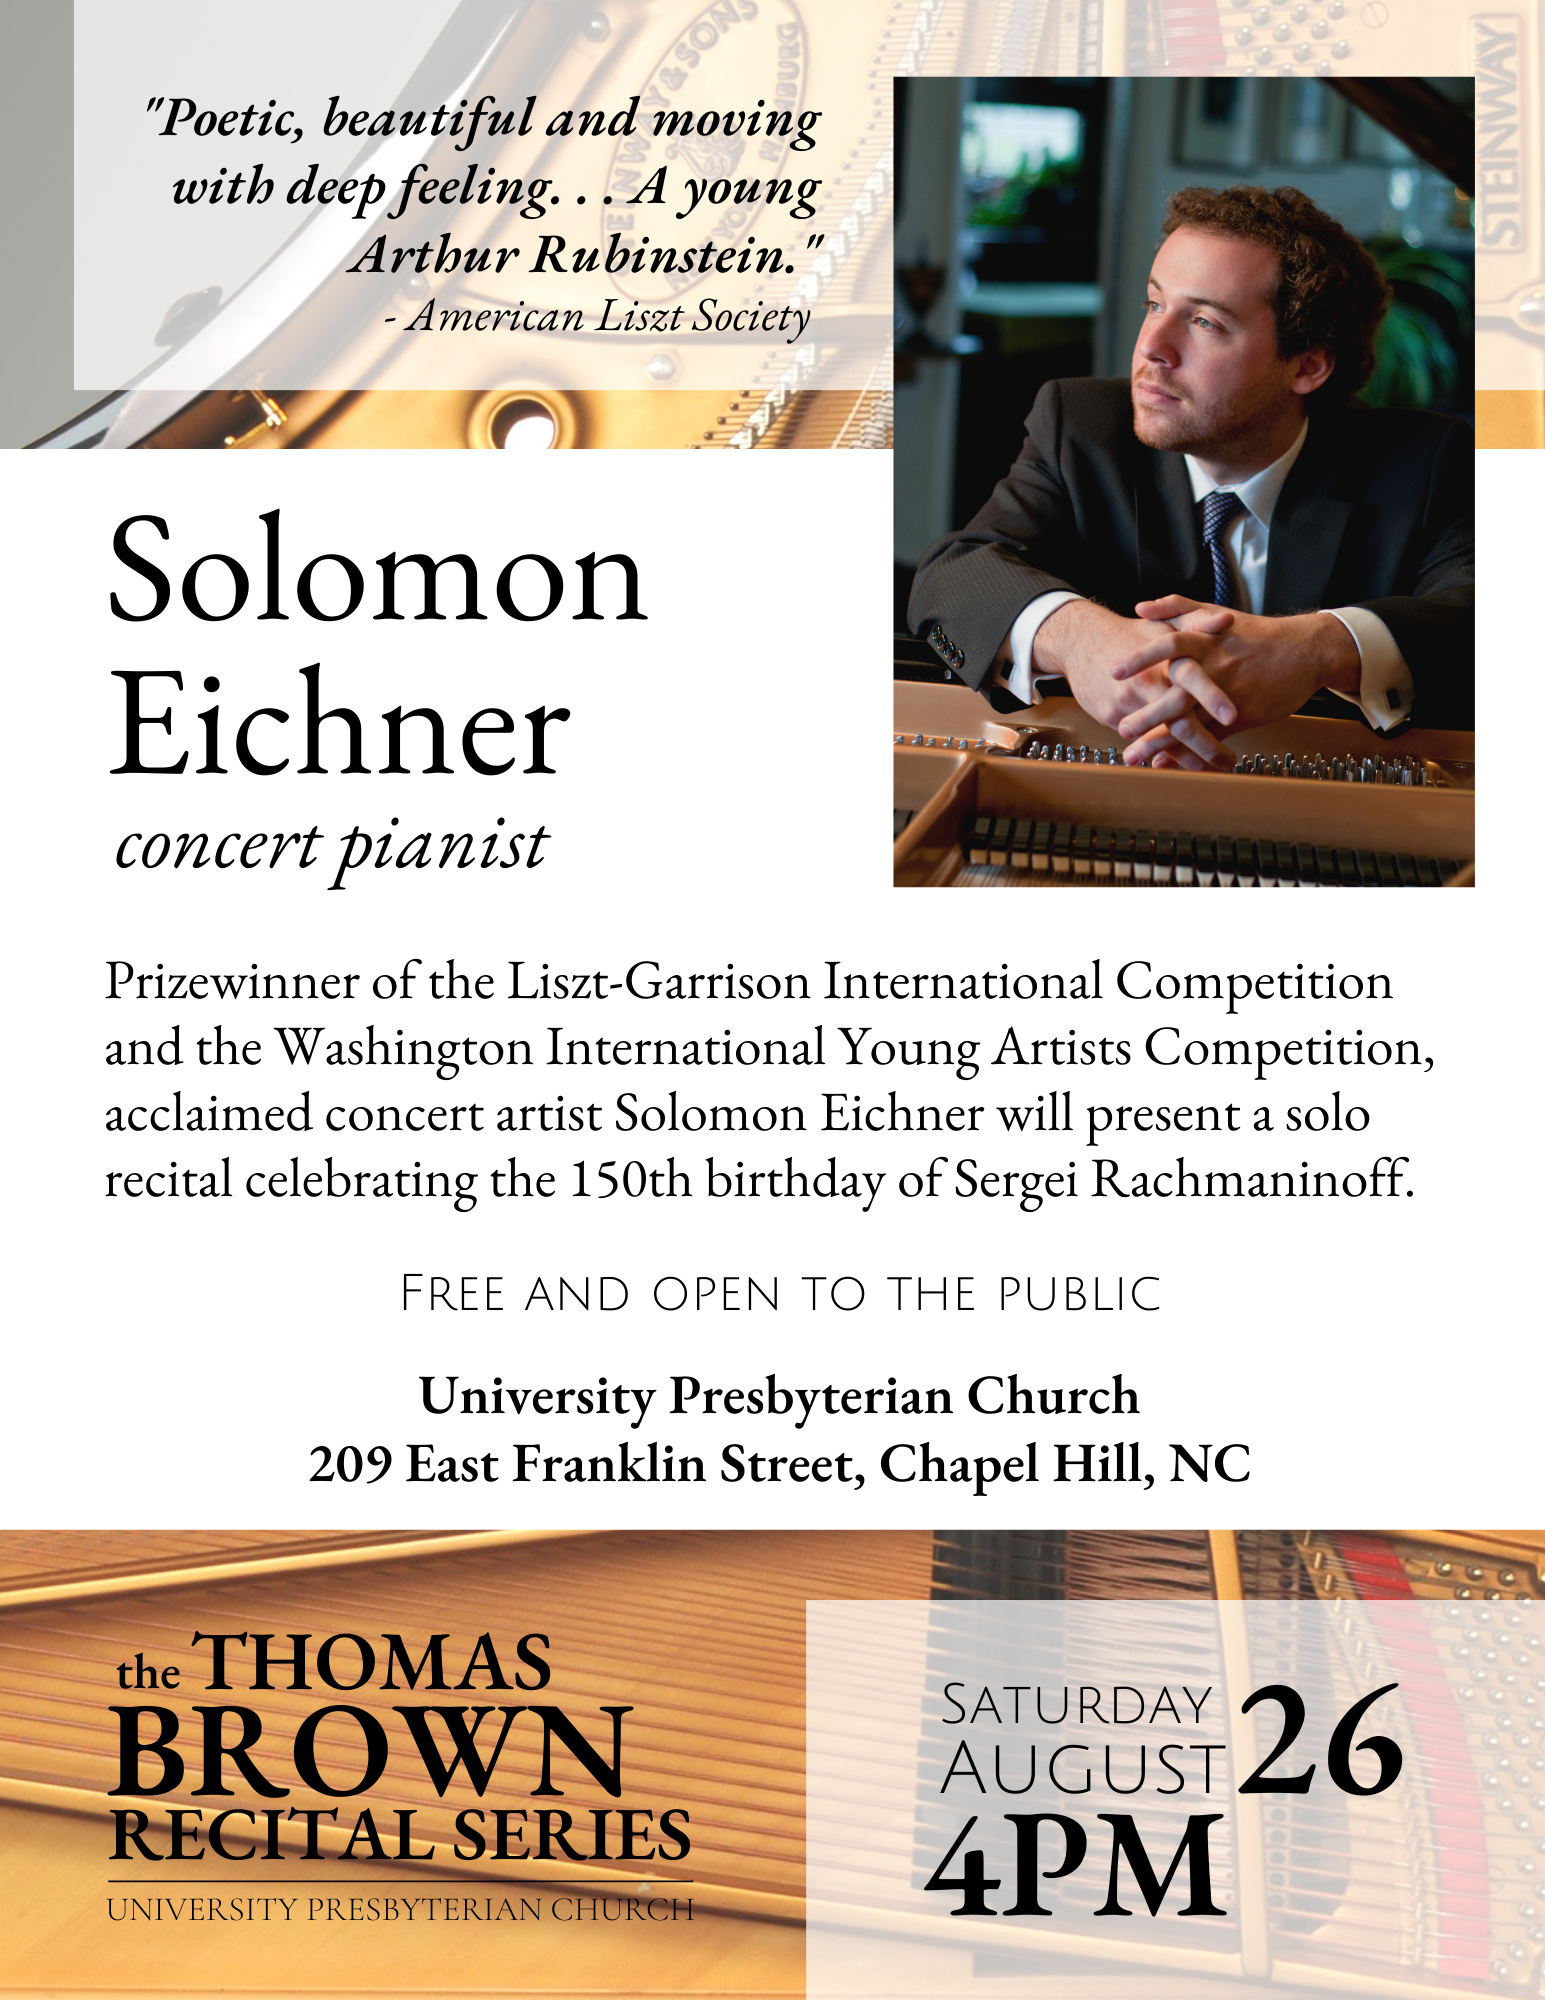 Thomas Brown Recital Series: Solomon Eichner, concert pianist Sat., Aug. 26 at 4 pm in the Sanctuary Prizewinner of the Liszt-Garrison International Competition and the Washington International Young Artists Competition, acclaimed concert artist Solomon Eichner will present a solo recital celebrating the 150th birthday of Sergei Rachmaninoff. Free and open to the public.